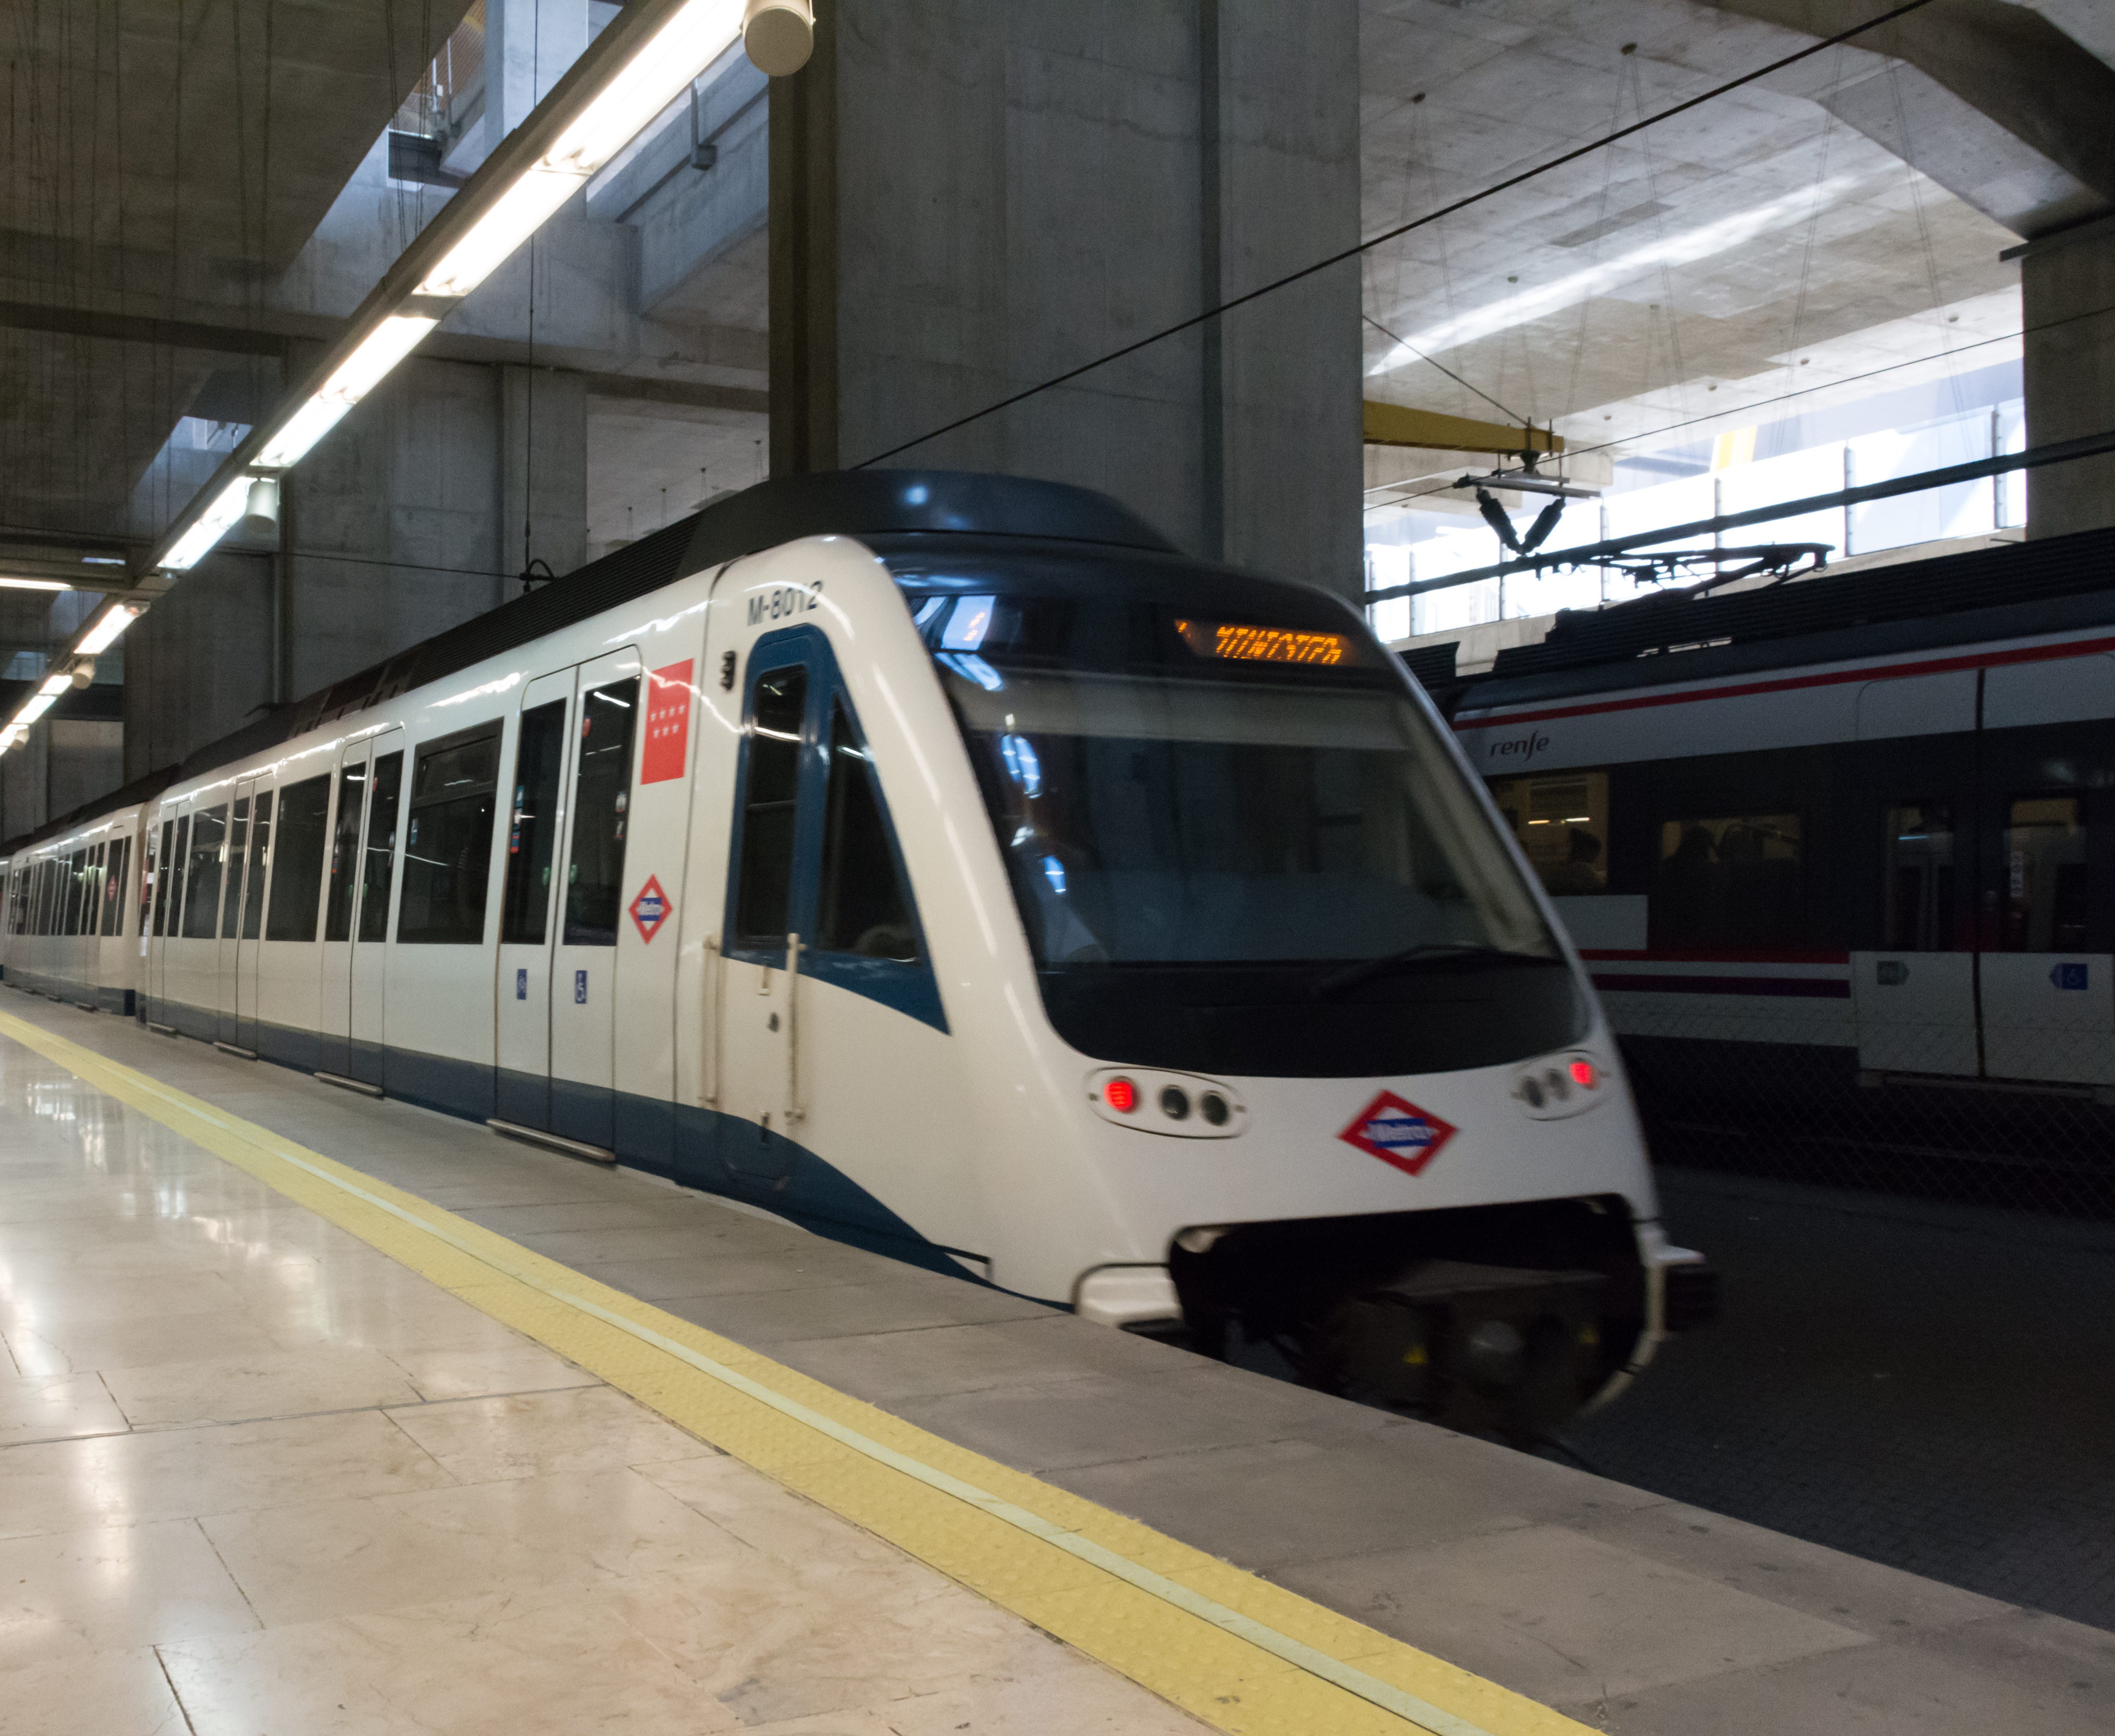 Madrid airport metro train arriving at the airport